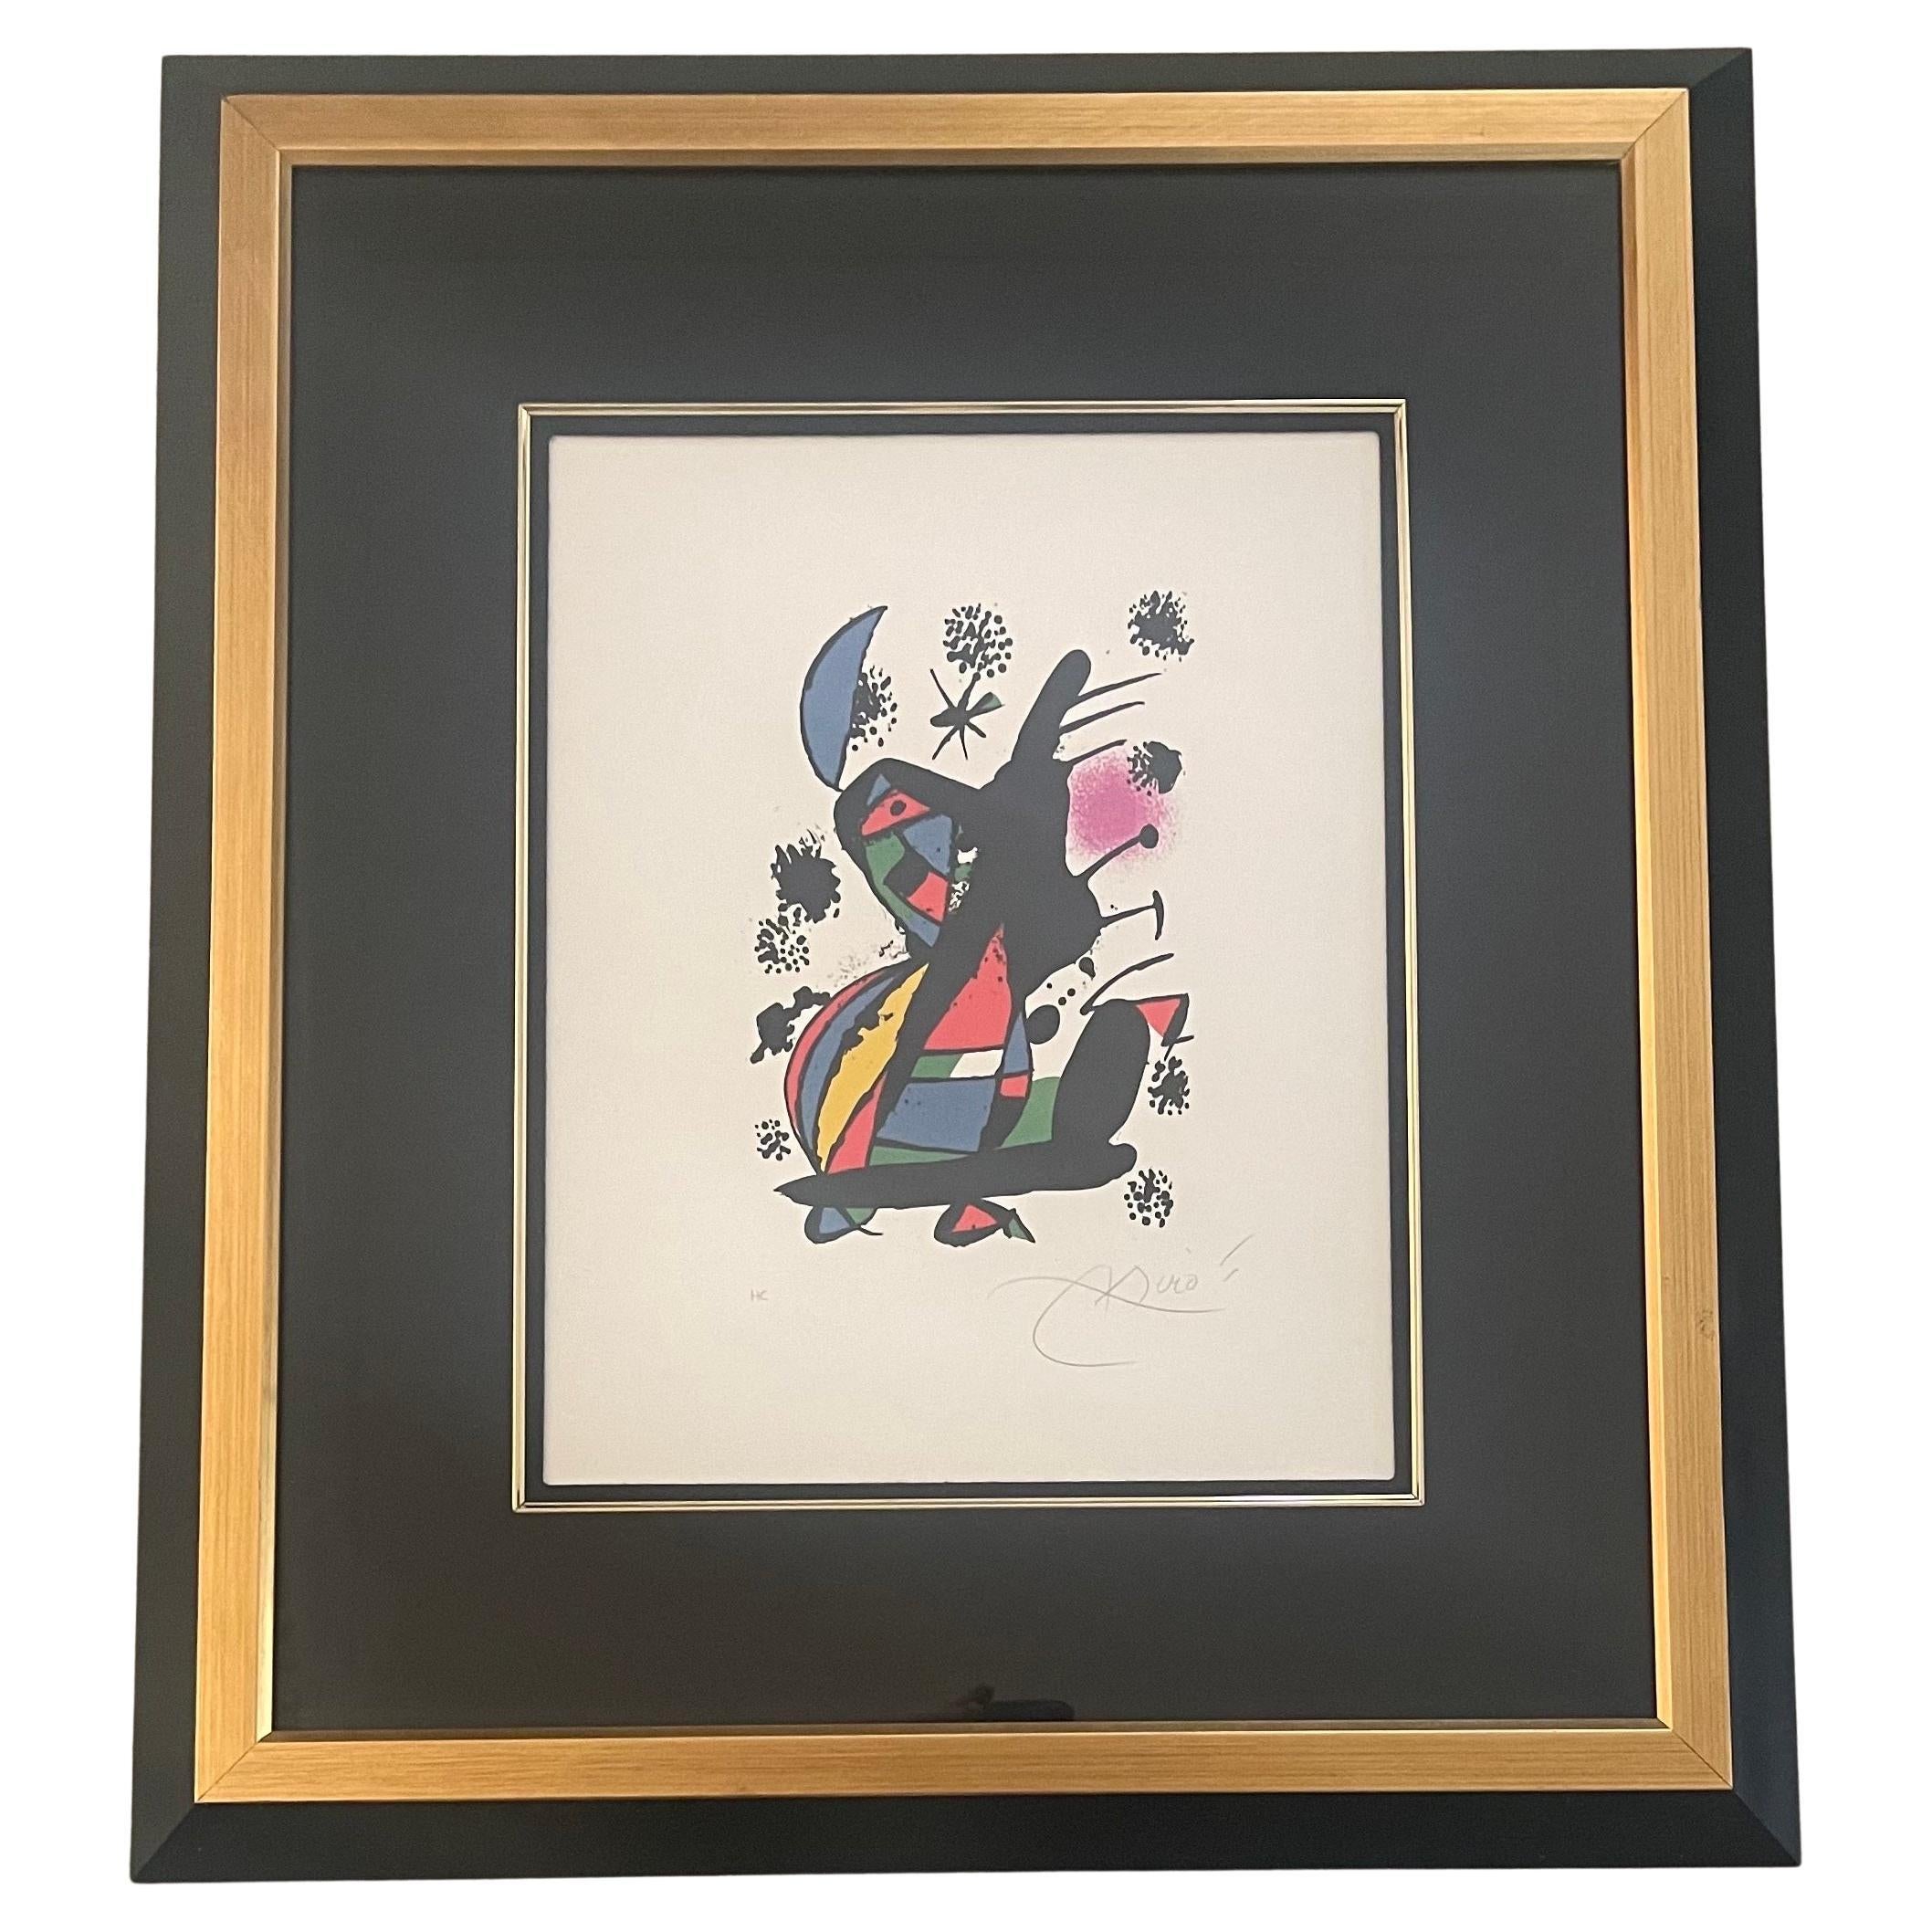 Abstract Lithograph Signed by Joan Miró